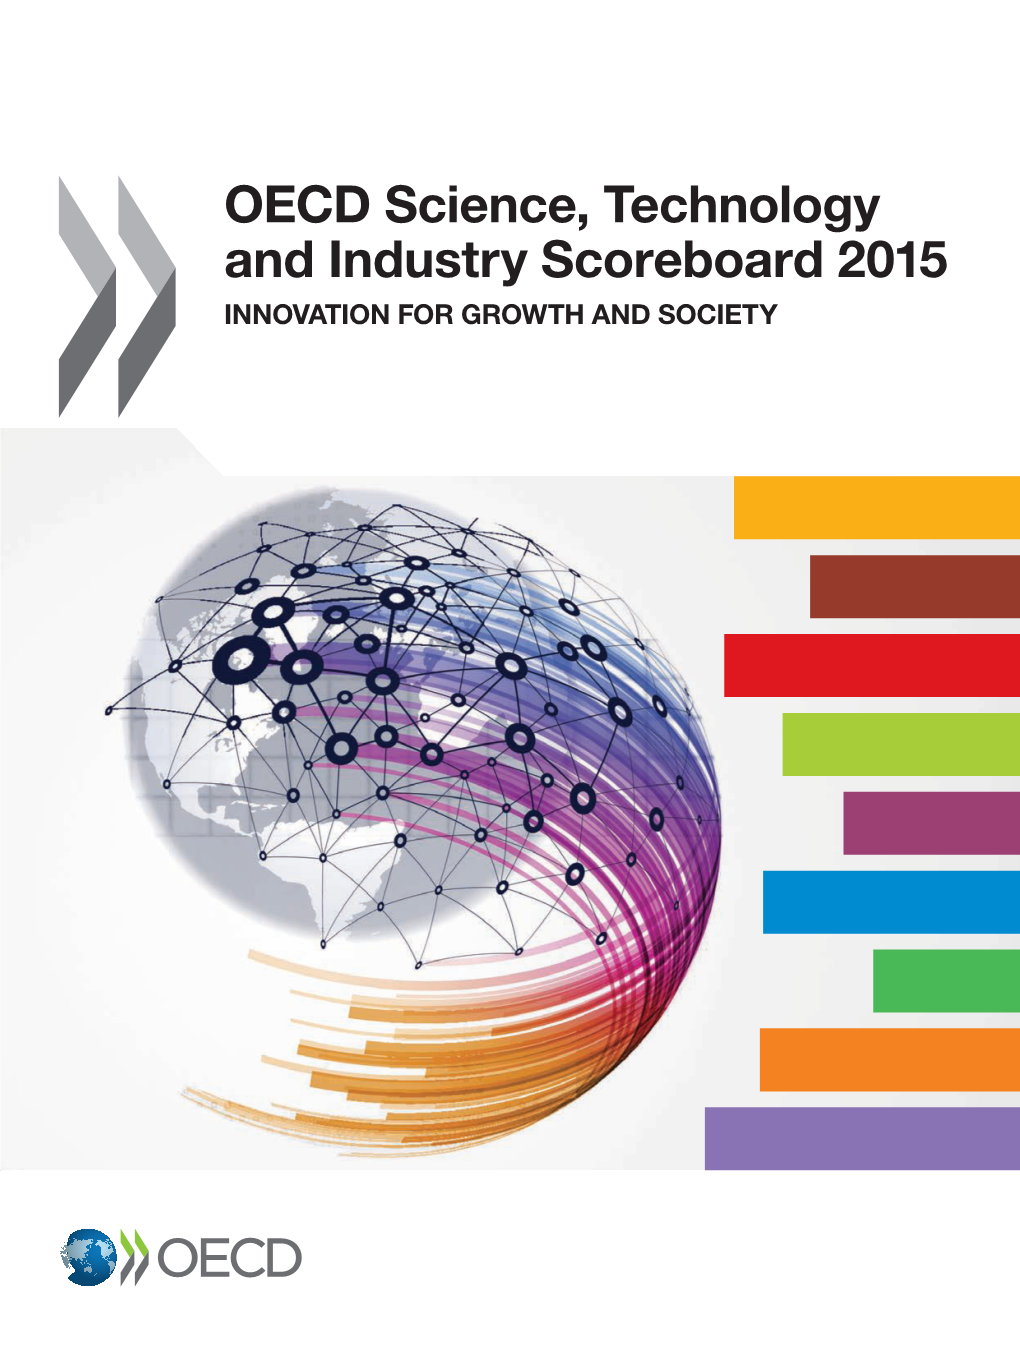 OECD Science, Technology and Industry Scoreboard 2015 Innovation for Growth and Society